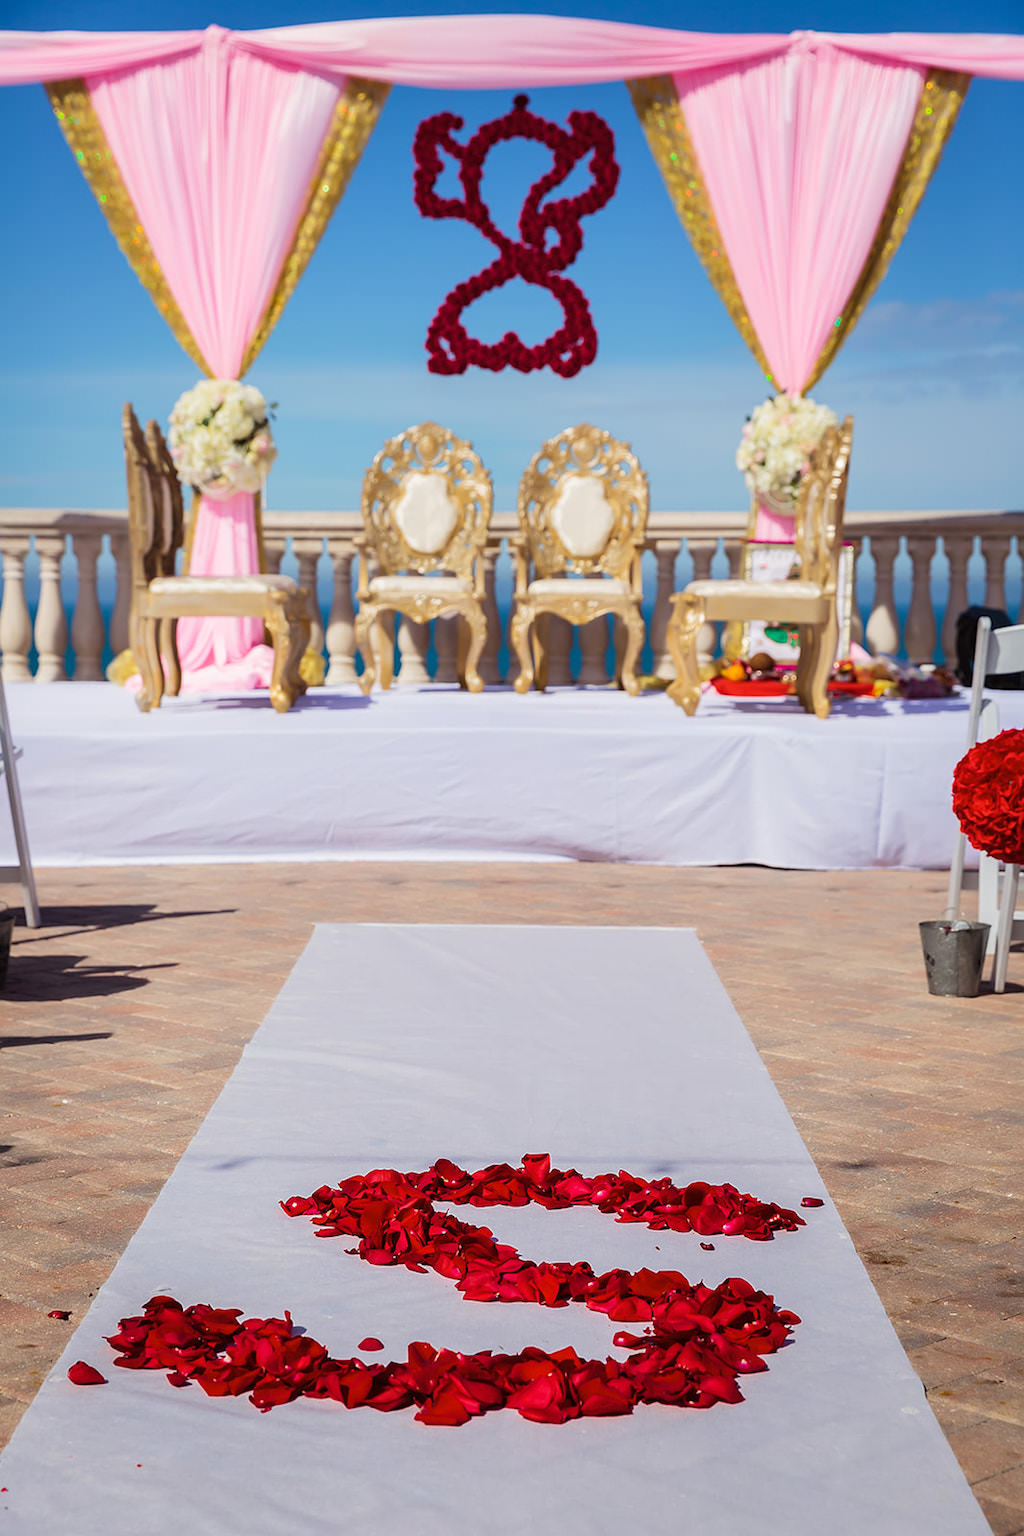 Florida Indian Hindu Rooftop Wedding Ceremony Decor, Gold and Blush Pink Linen Drapery Arch, White, Ivory Blush Pink Floral Bouquets, Red Hanging Floral Decor, Gold and Ivory Cushion Chairs, White Aisle Runner with Personalized Red Rose Petal | Clearwater Beach Wedding Venue Hyatt Regency Clearwater